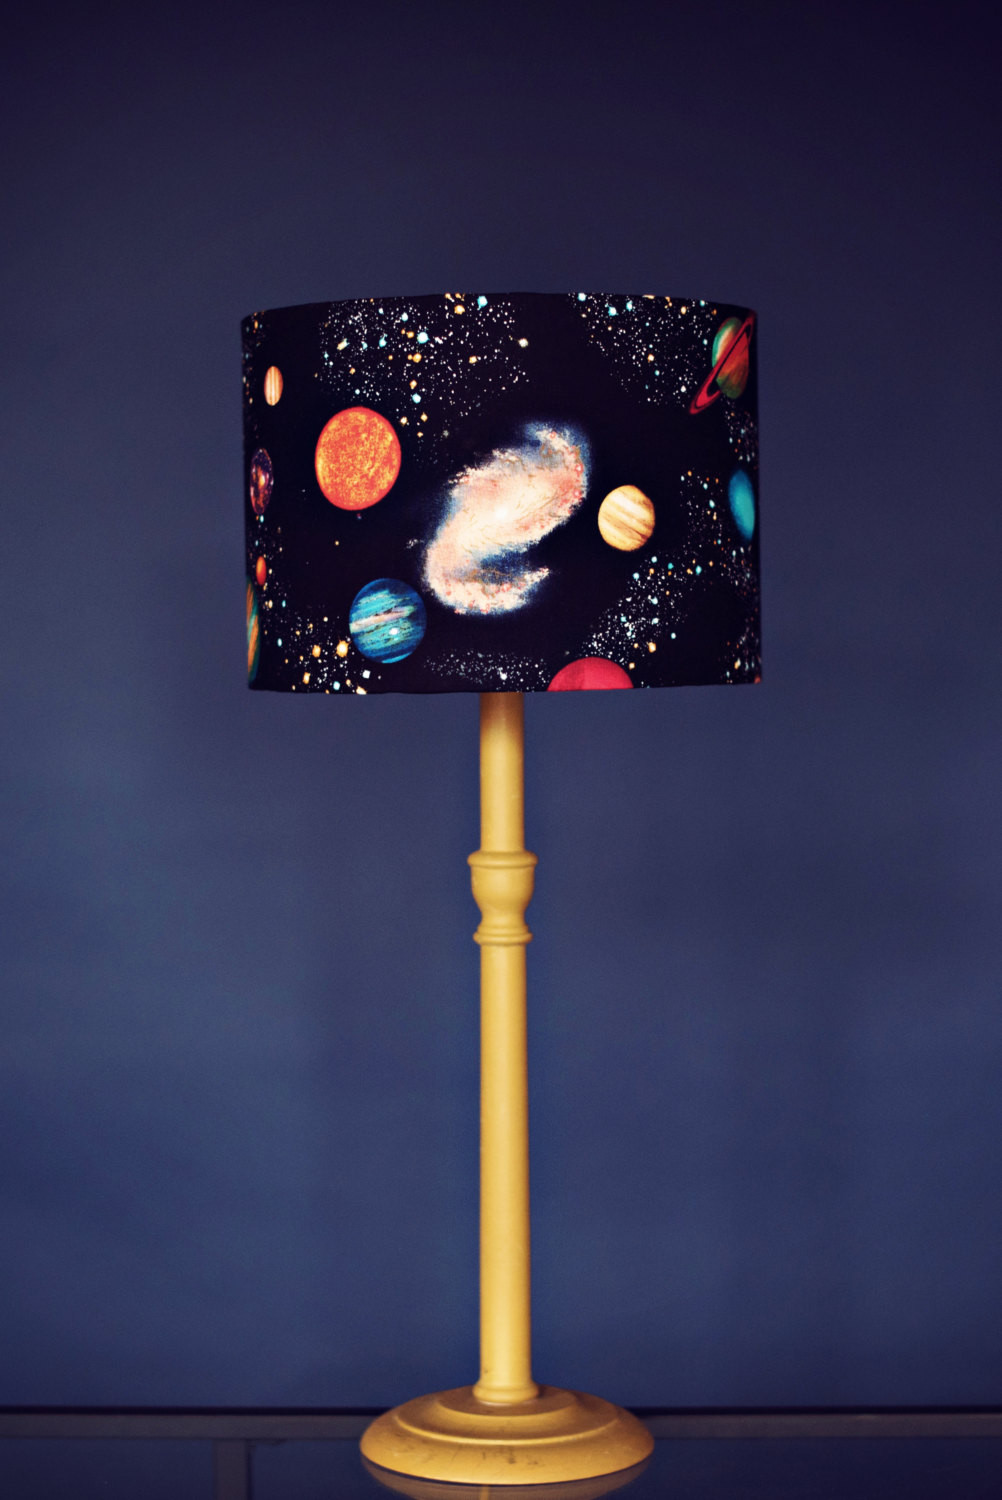 Lamp Shades For Kids Room
 Planet lampshade stars lamp shade space birthday t kids